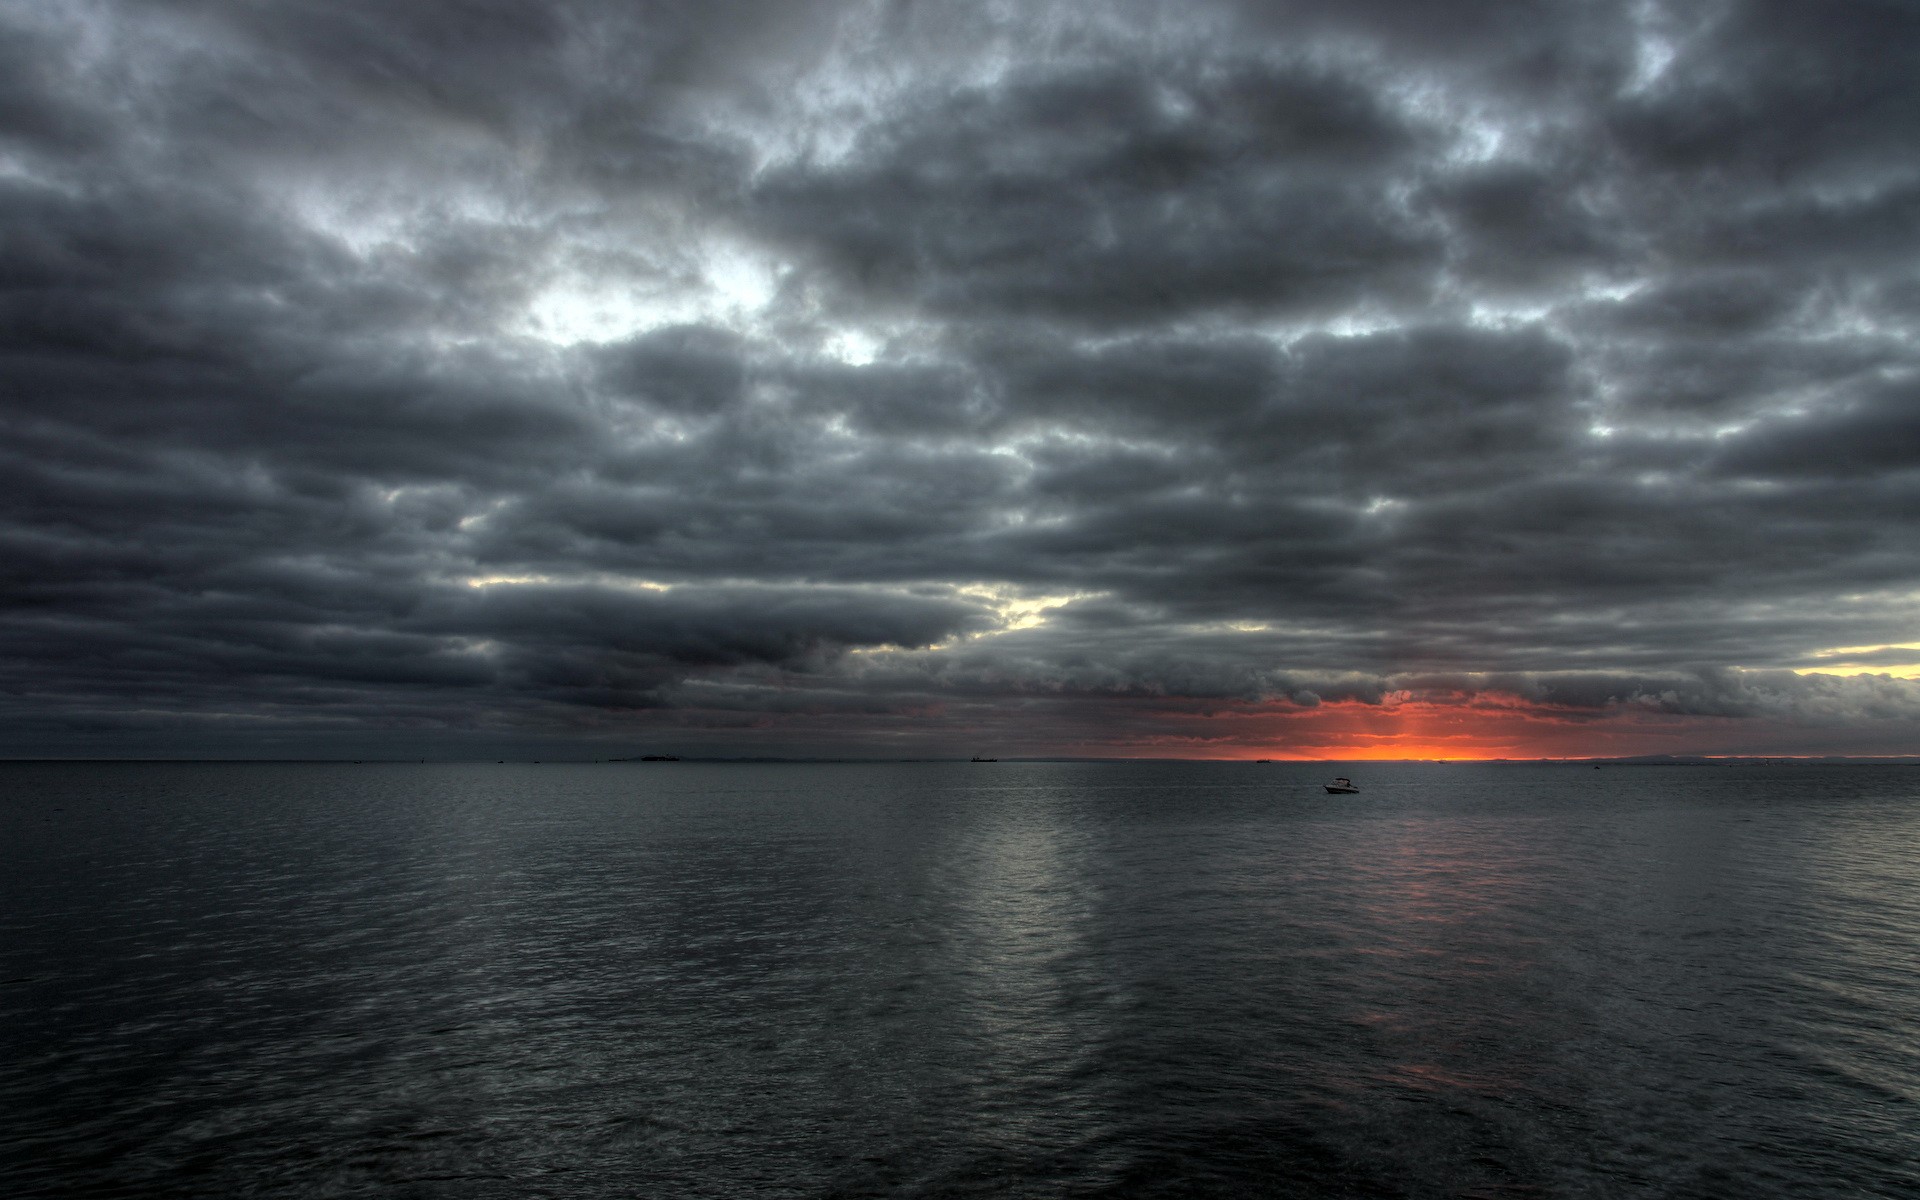 Oceans: Cloudy Seas Sea Stormy Sailing Approaching Storm Storms High ...